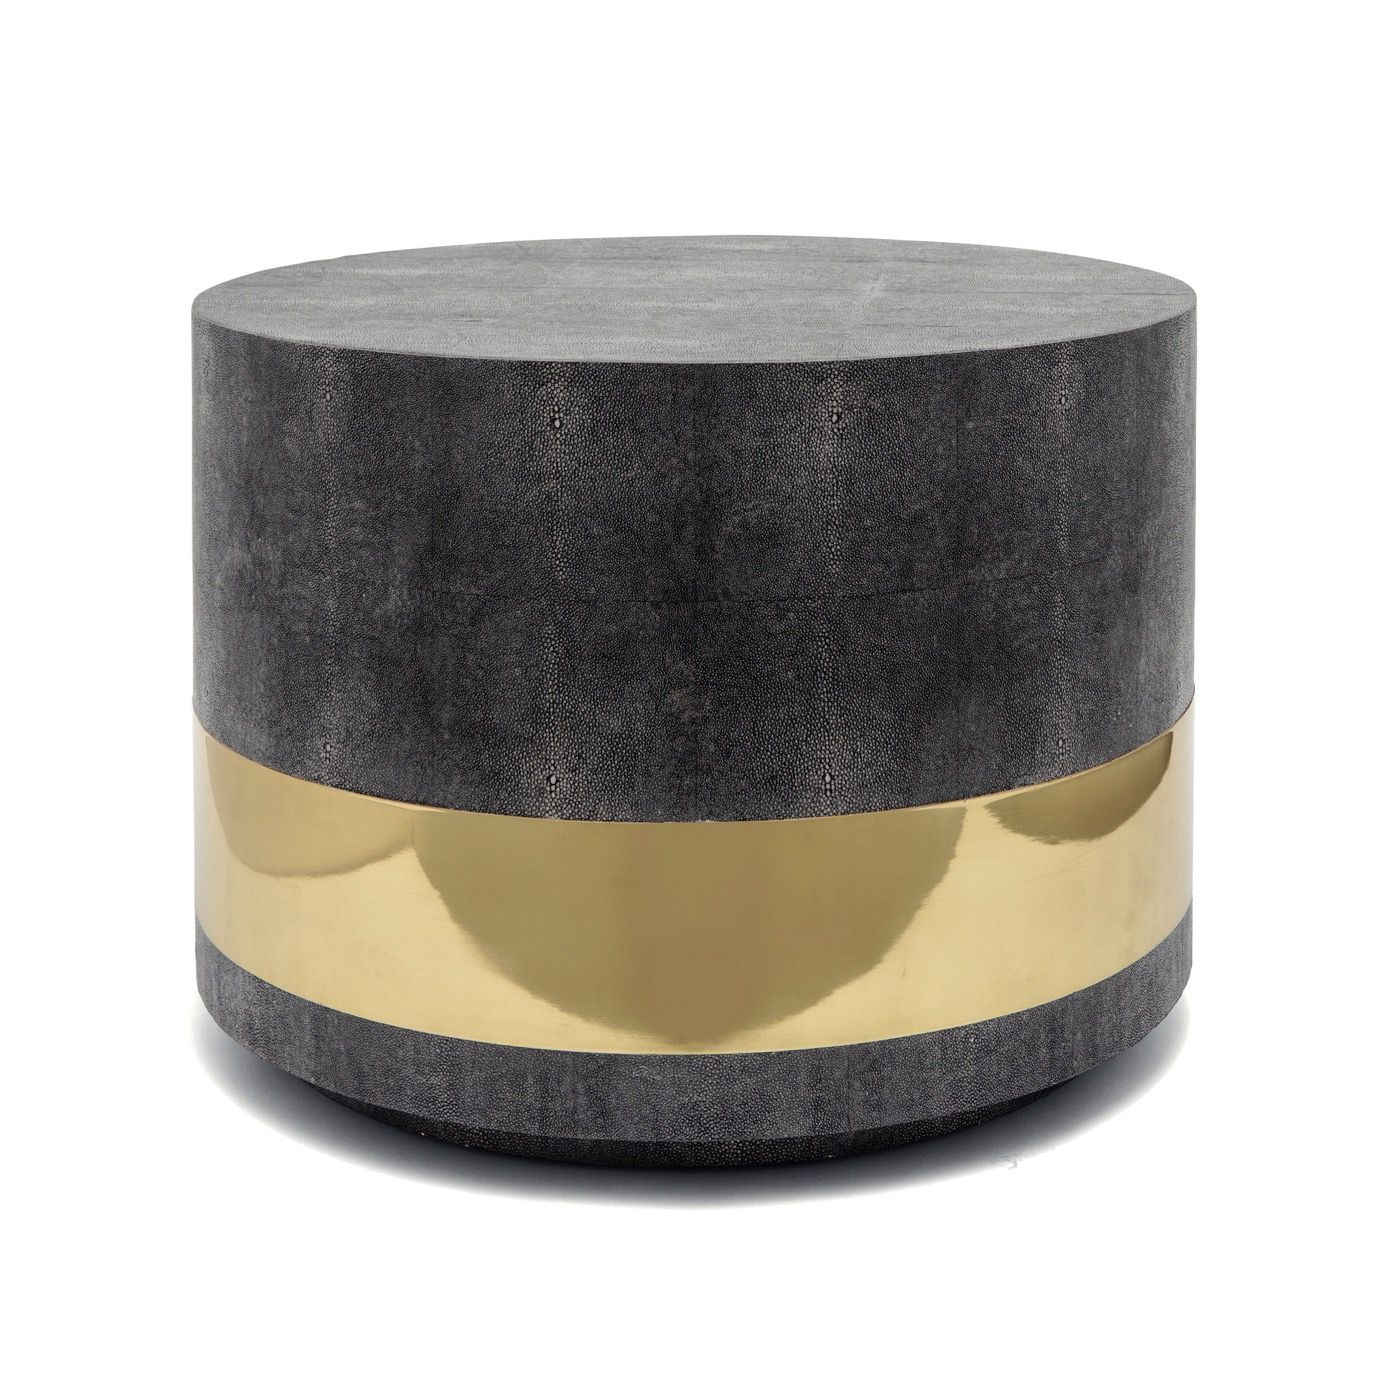 Lavin "Shagreen" Coffee Table | Grey For Lavin Ceramic Garden Stools (View 24 of 25)